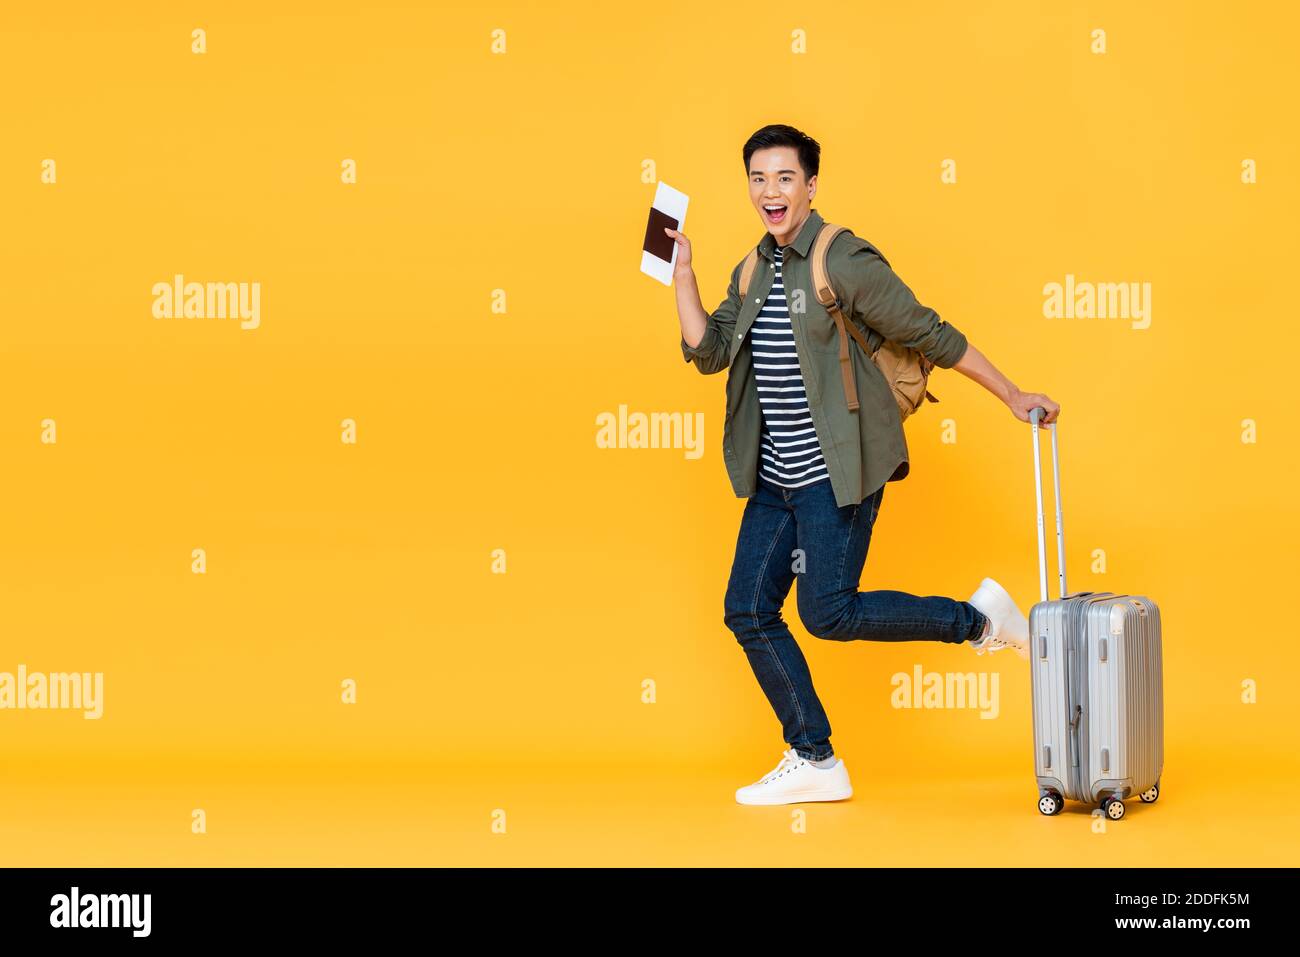 Full length portrait of smiling happy handsome young Asian man tourist with passport and luggage ready to travel on vacations isolated in yellow studi Stock Photo